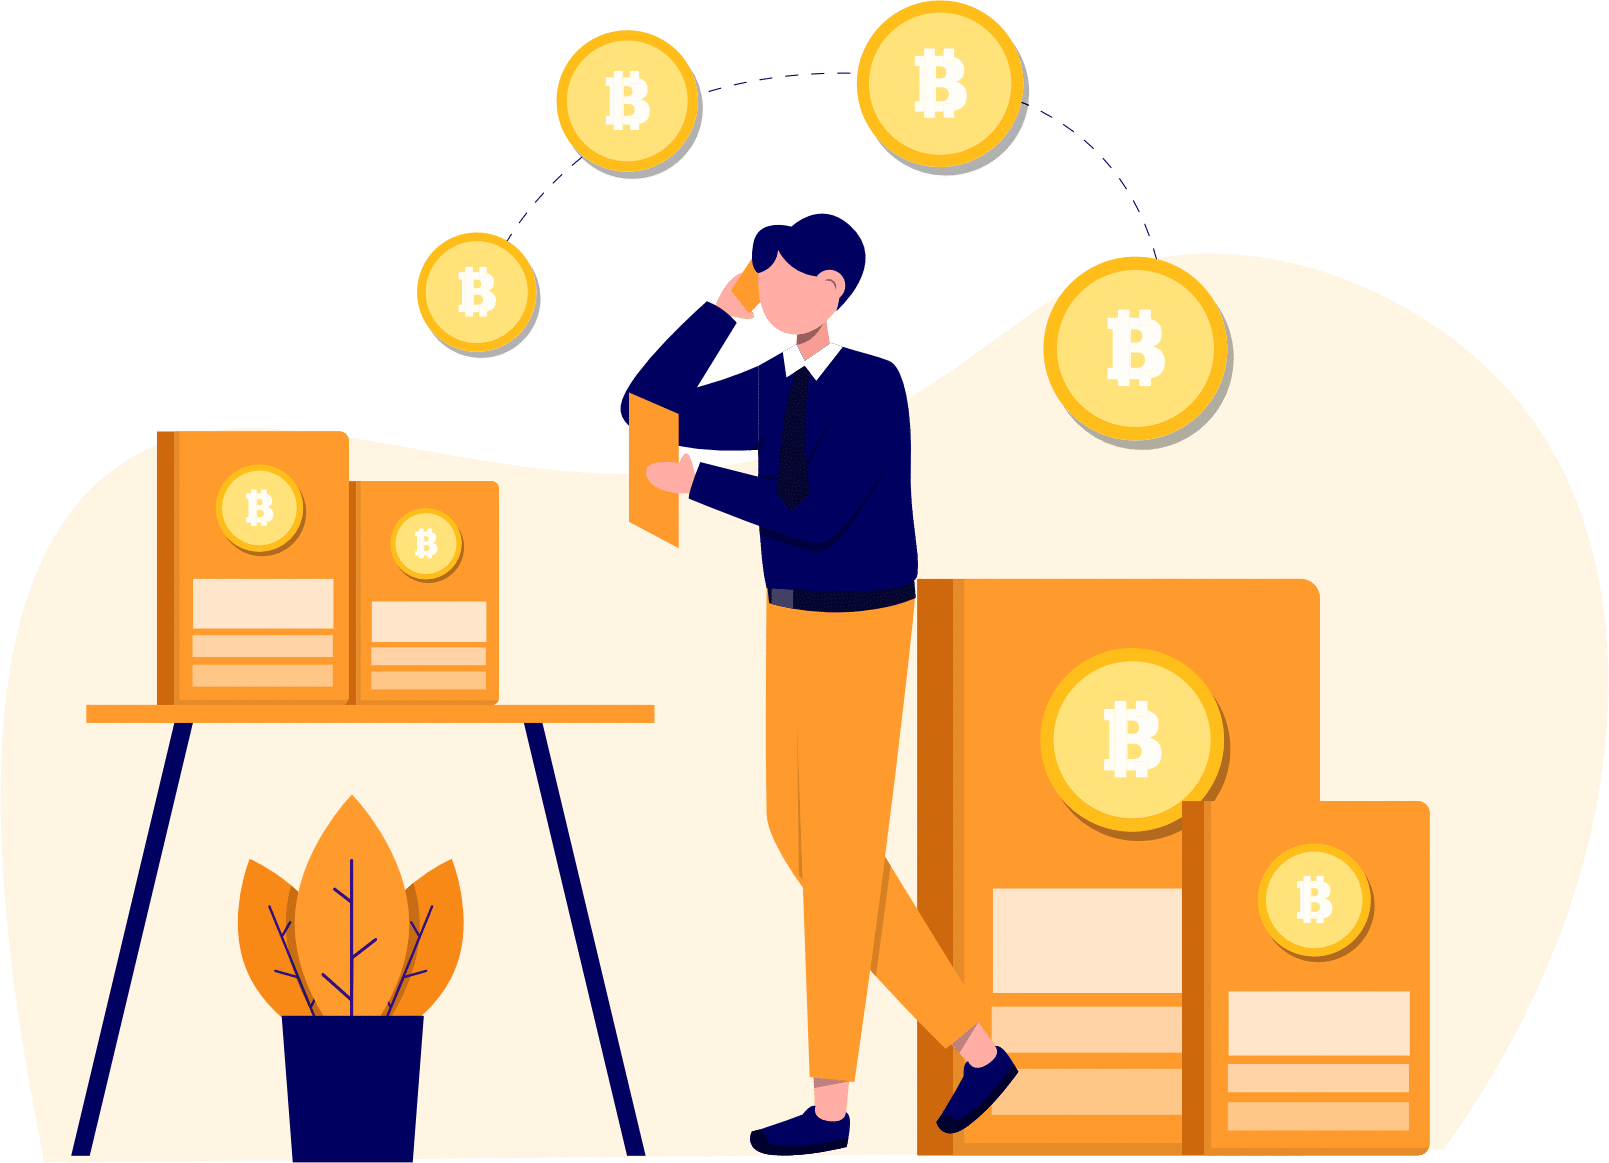 Graphic illustration of man on cellphone asking questions about Bitcoin and other cryptocurrencies. 3 Crypto documents enlarged beside him.